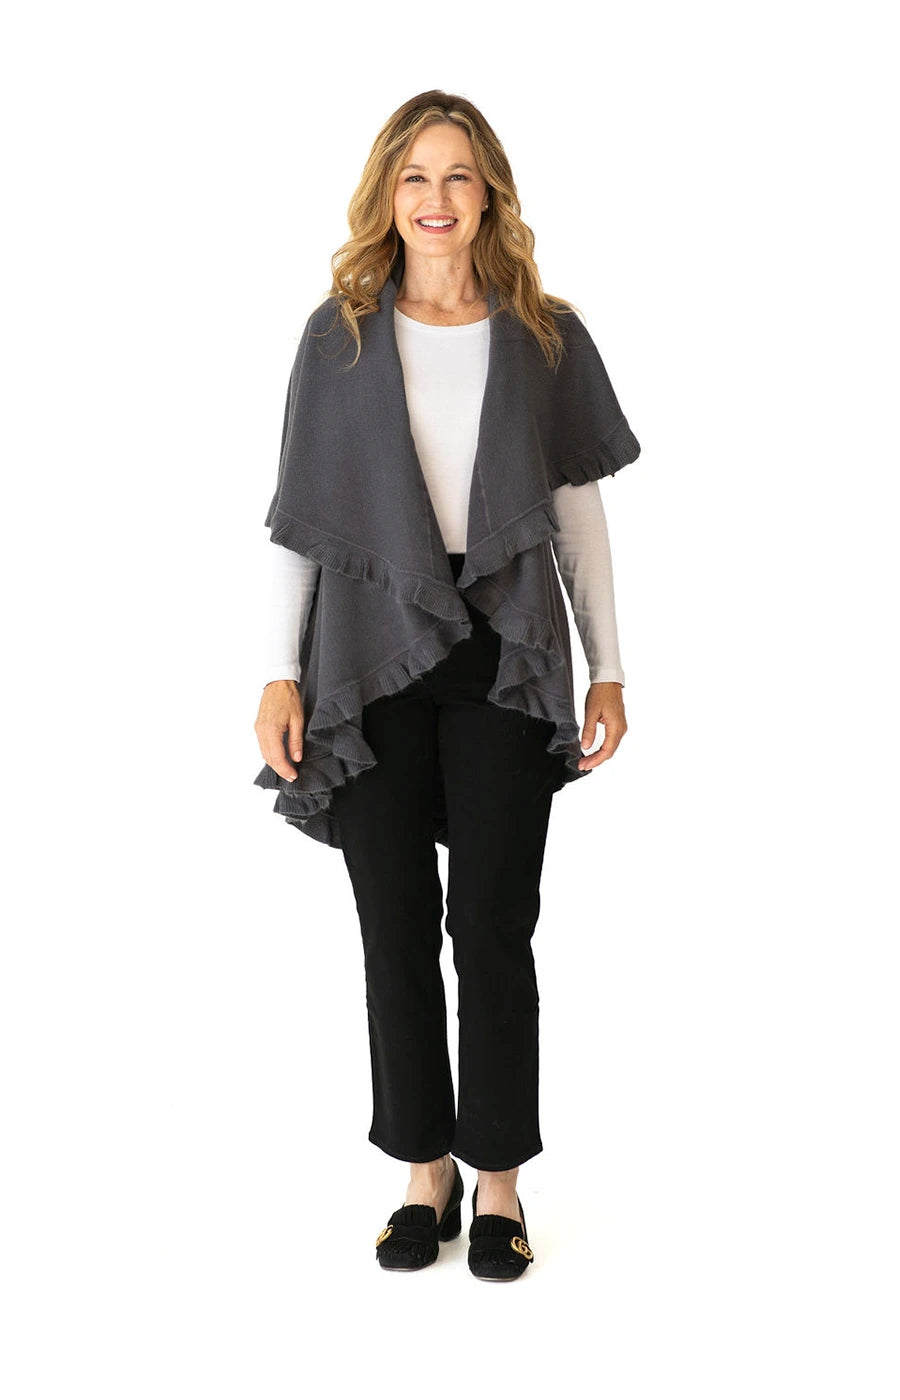 Shawl Sweater Vest in Grey with Ruffle Trim